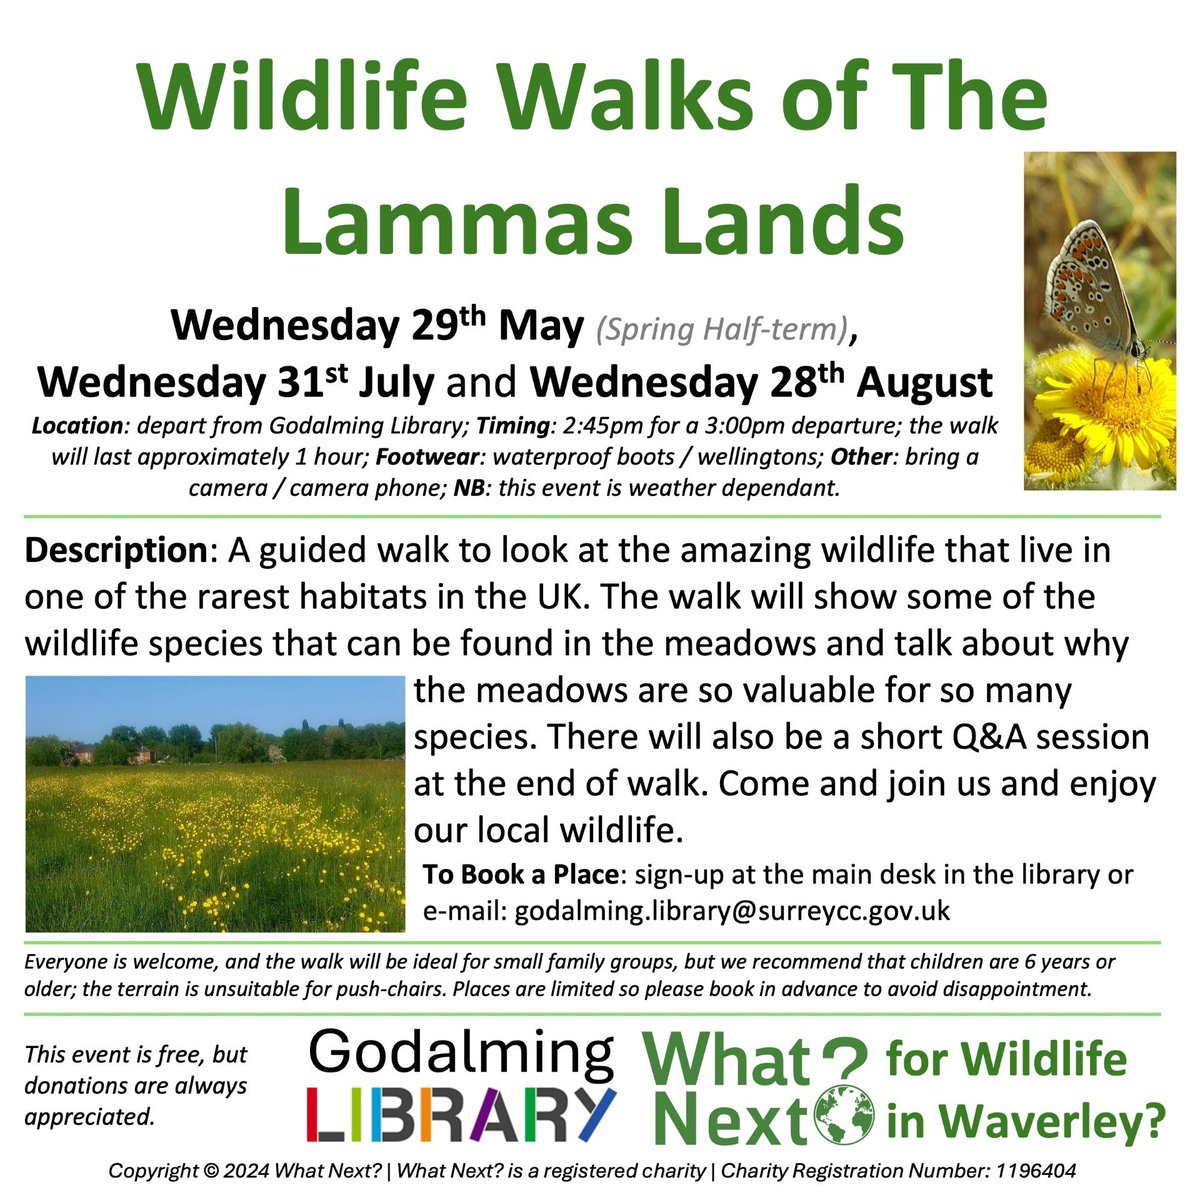 Join What Next? for a wildlife walk around the Lammas Lands this half-term and learn all about the wildlife! For all ages 6+ Book in the library or email us at Godalming.Library@surreycc.gov.uk @SurreyLibraries